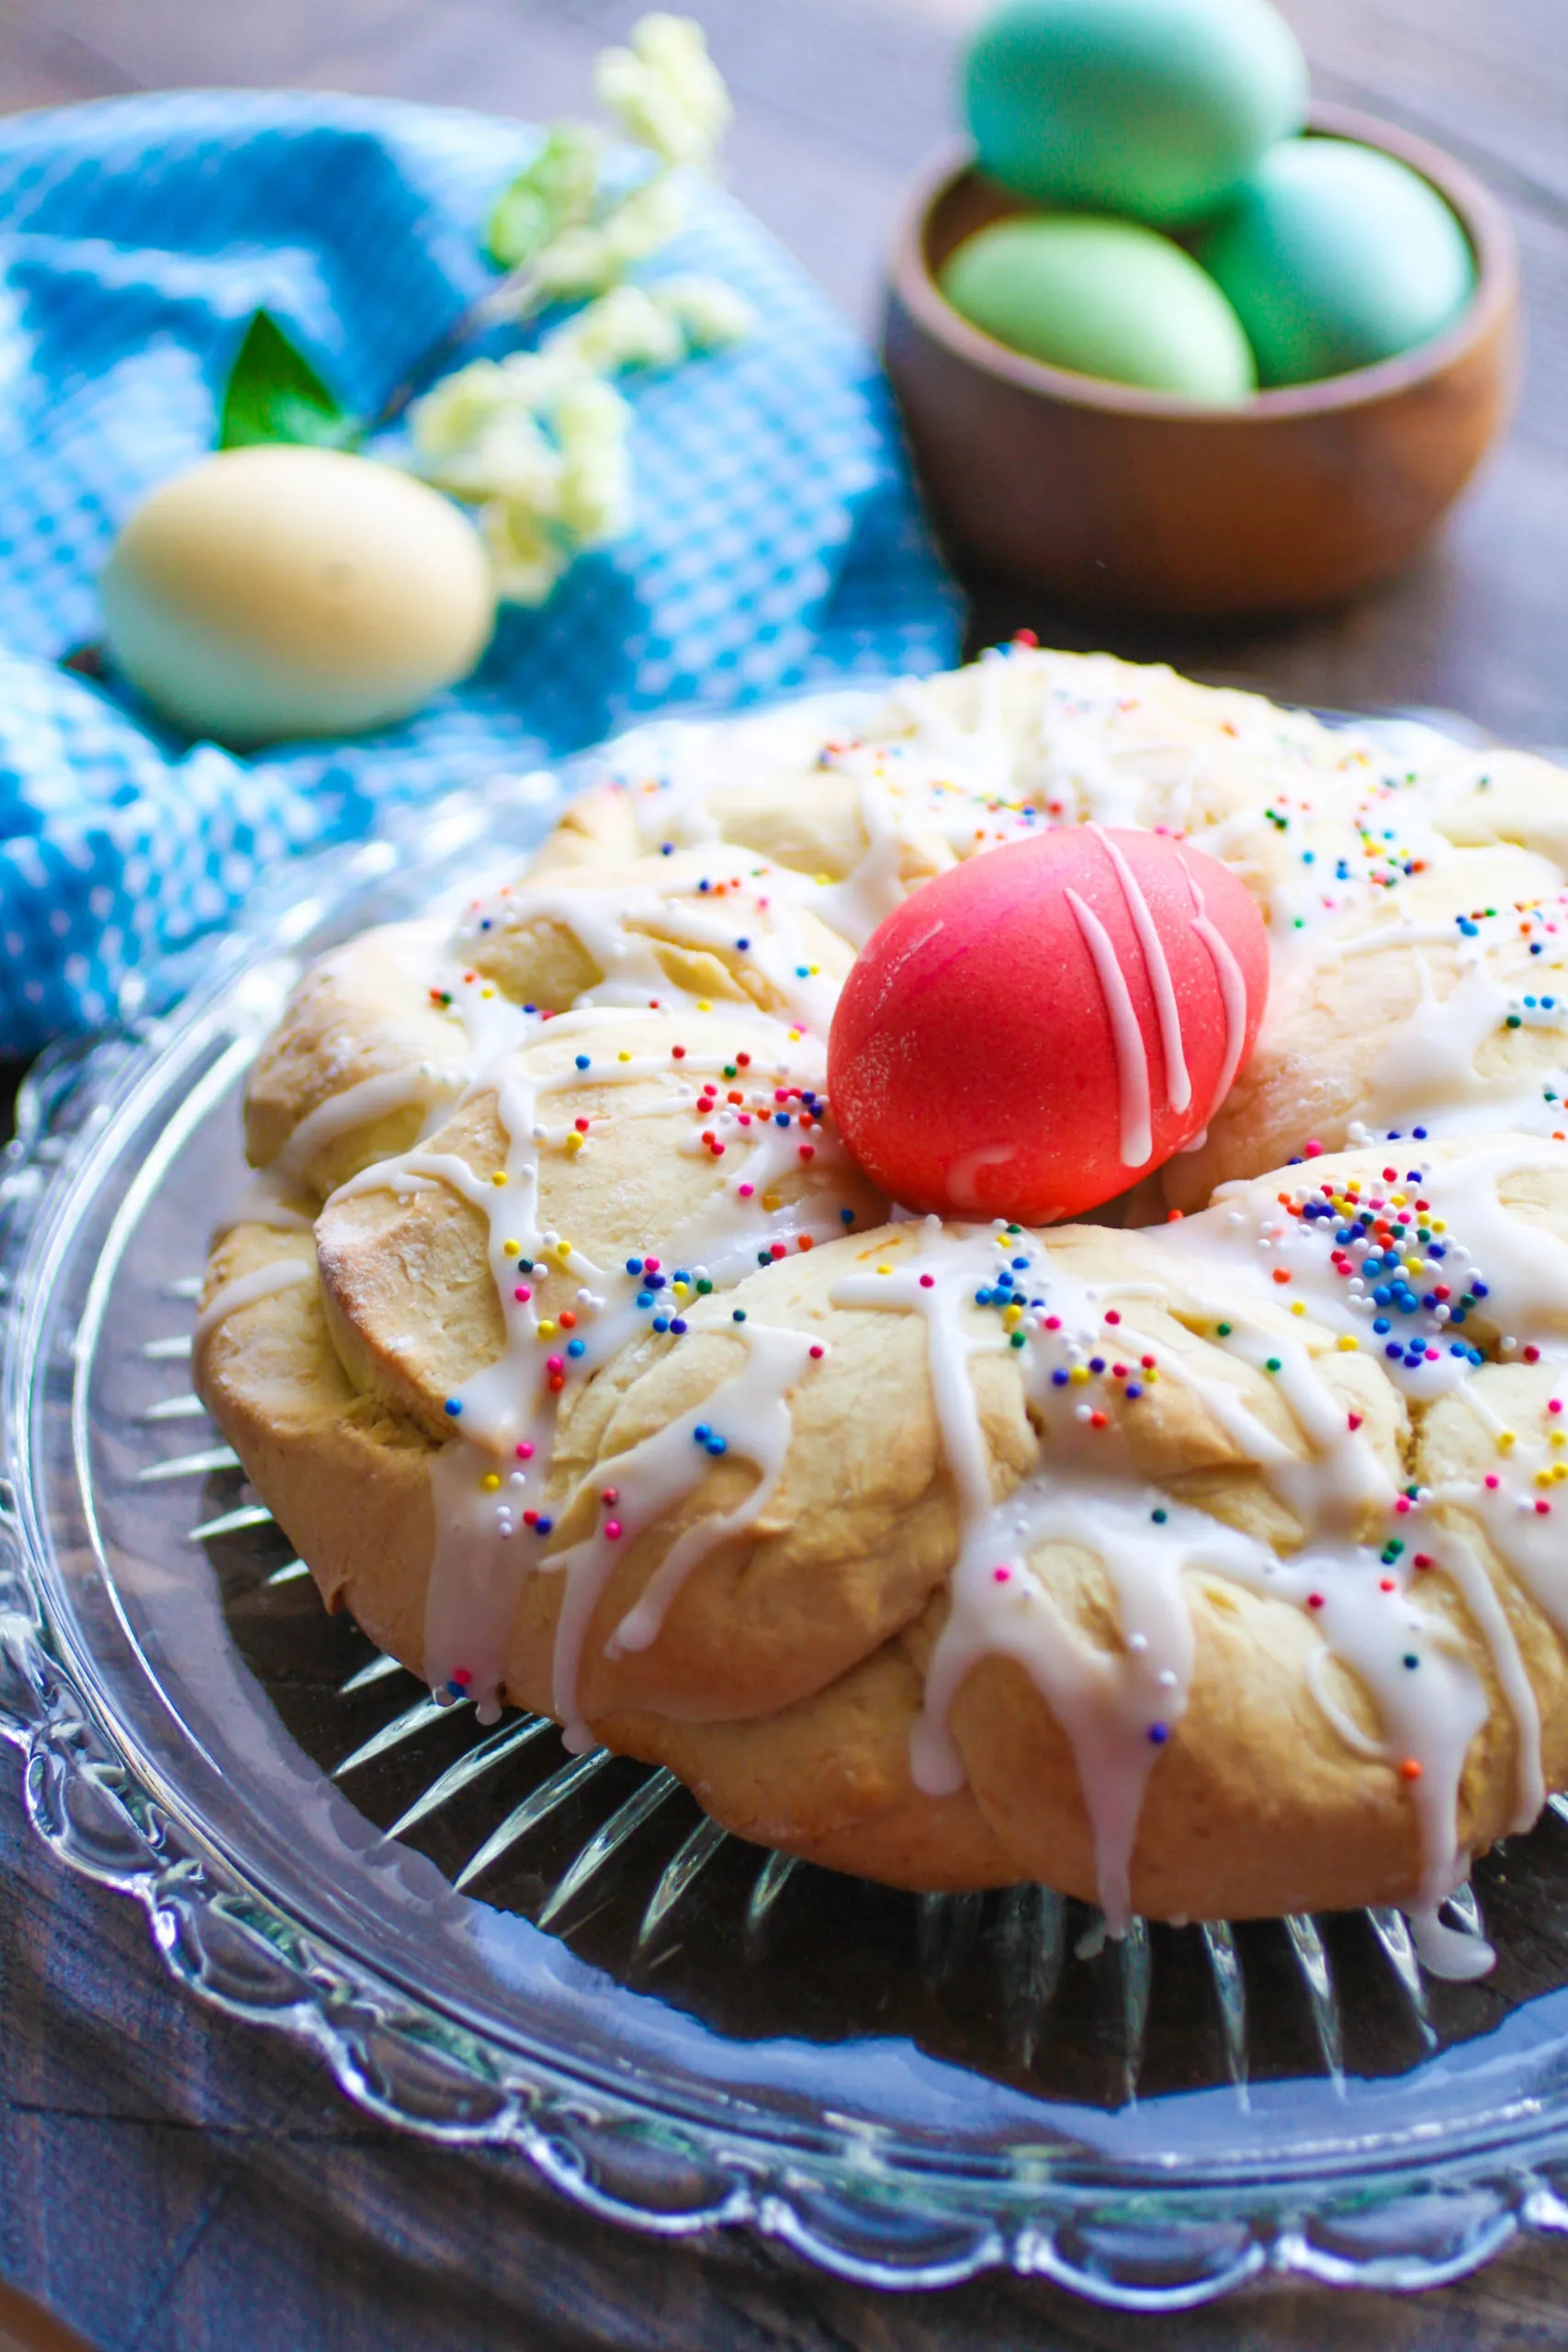 No-Rise Italian Easter Bread is a festive spring treat!